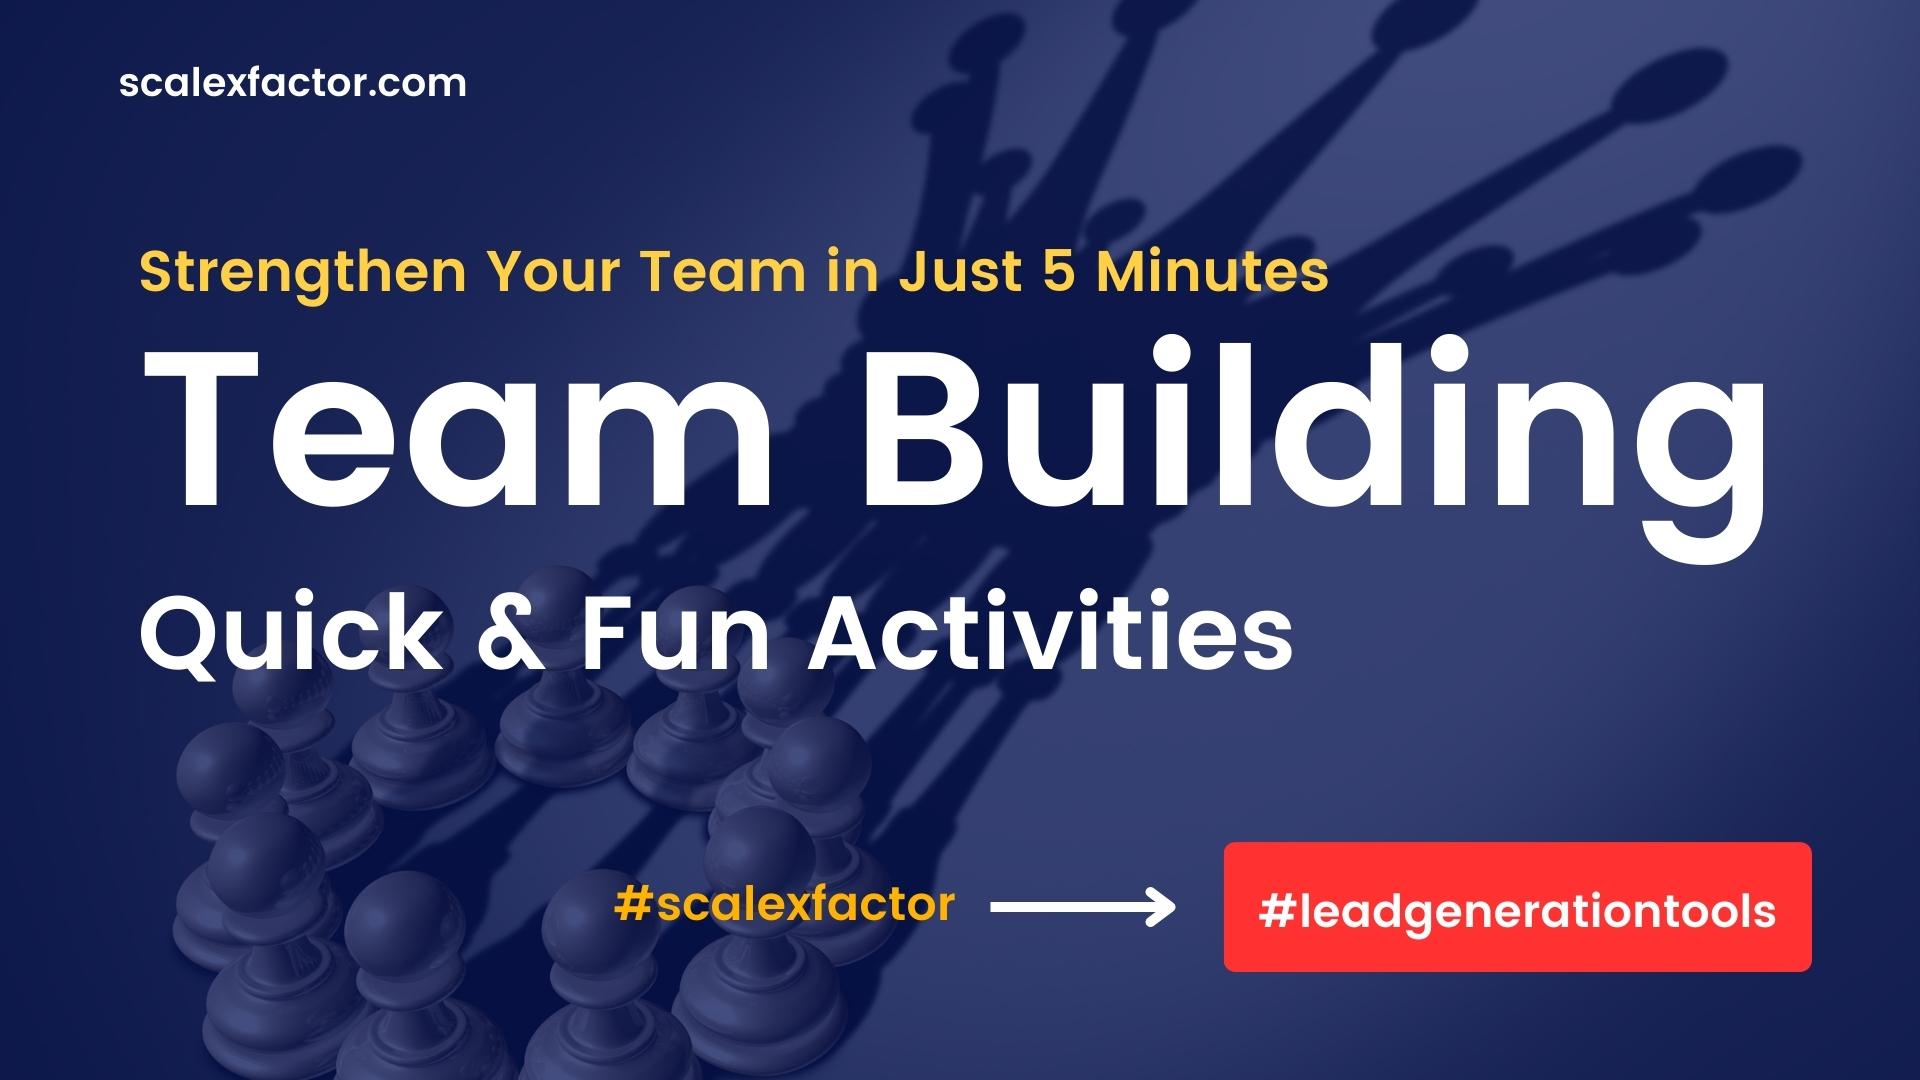 Strengthen Your Team in Just 5 Minutes: Quick and Fun Team Building Activities